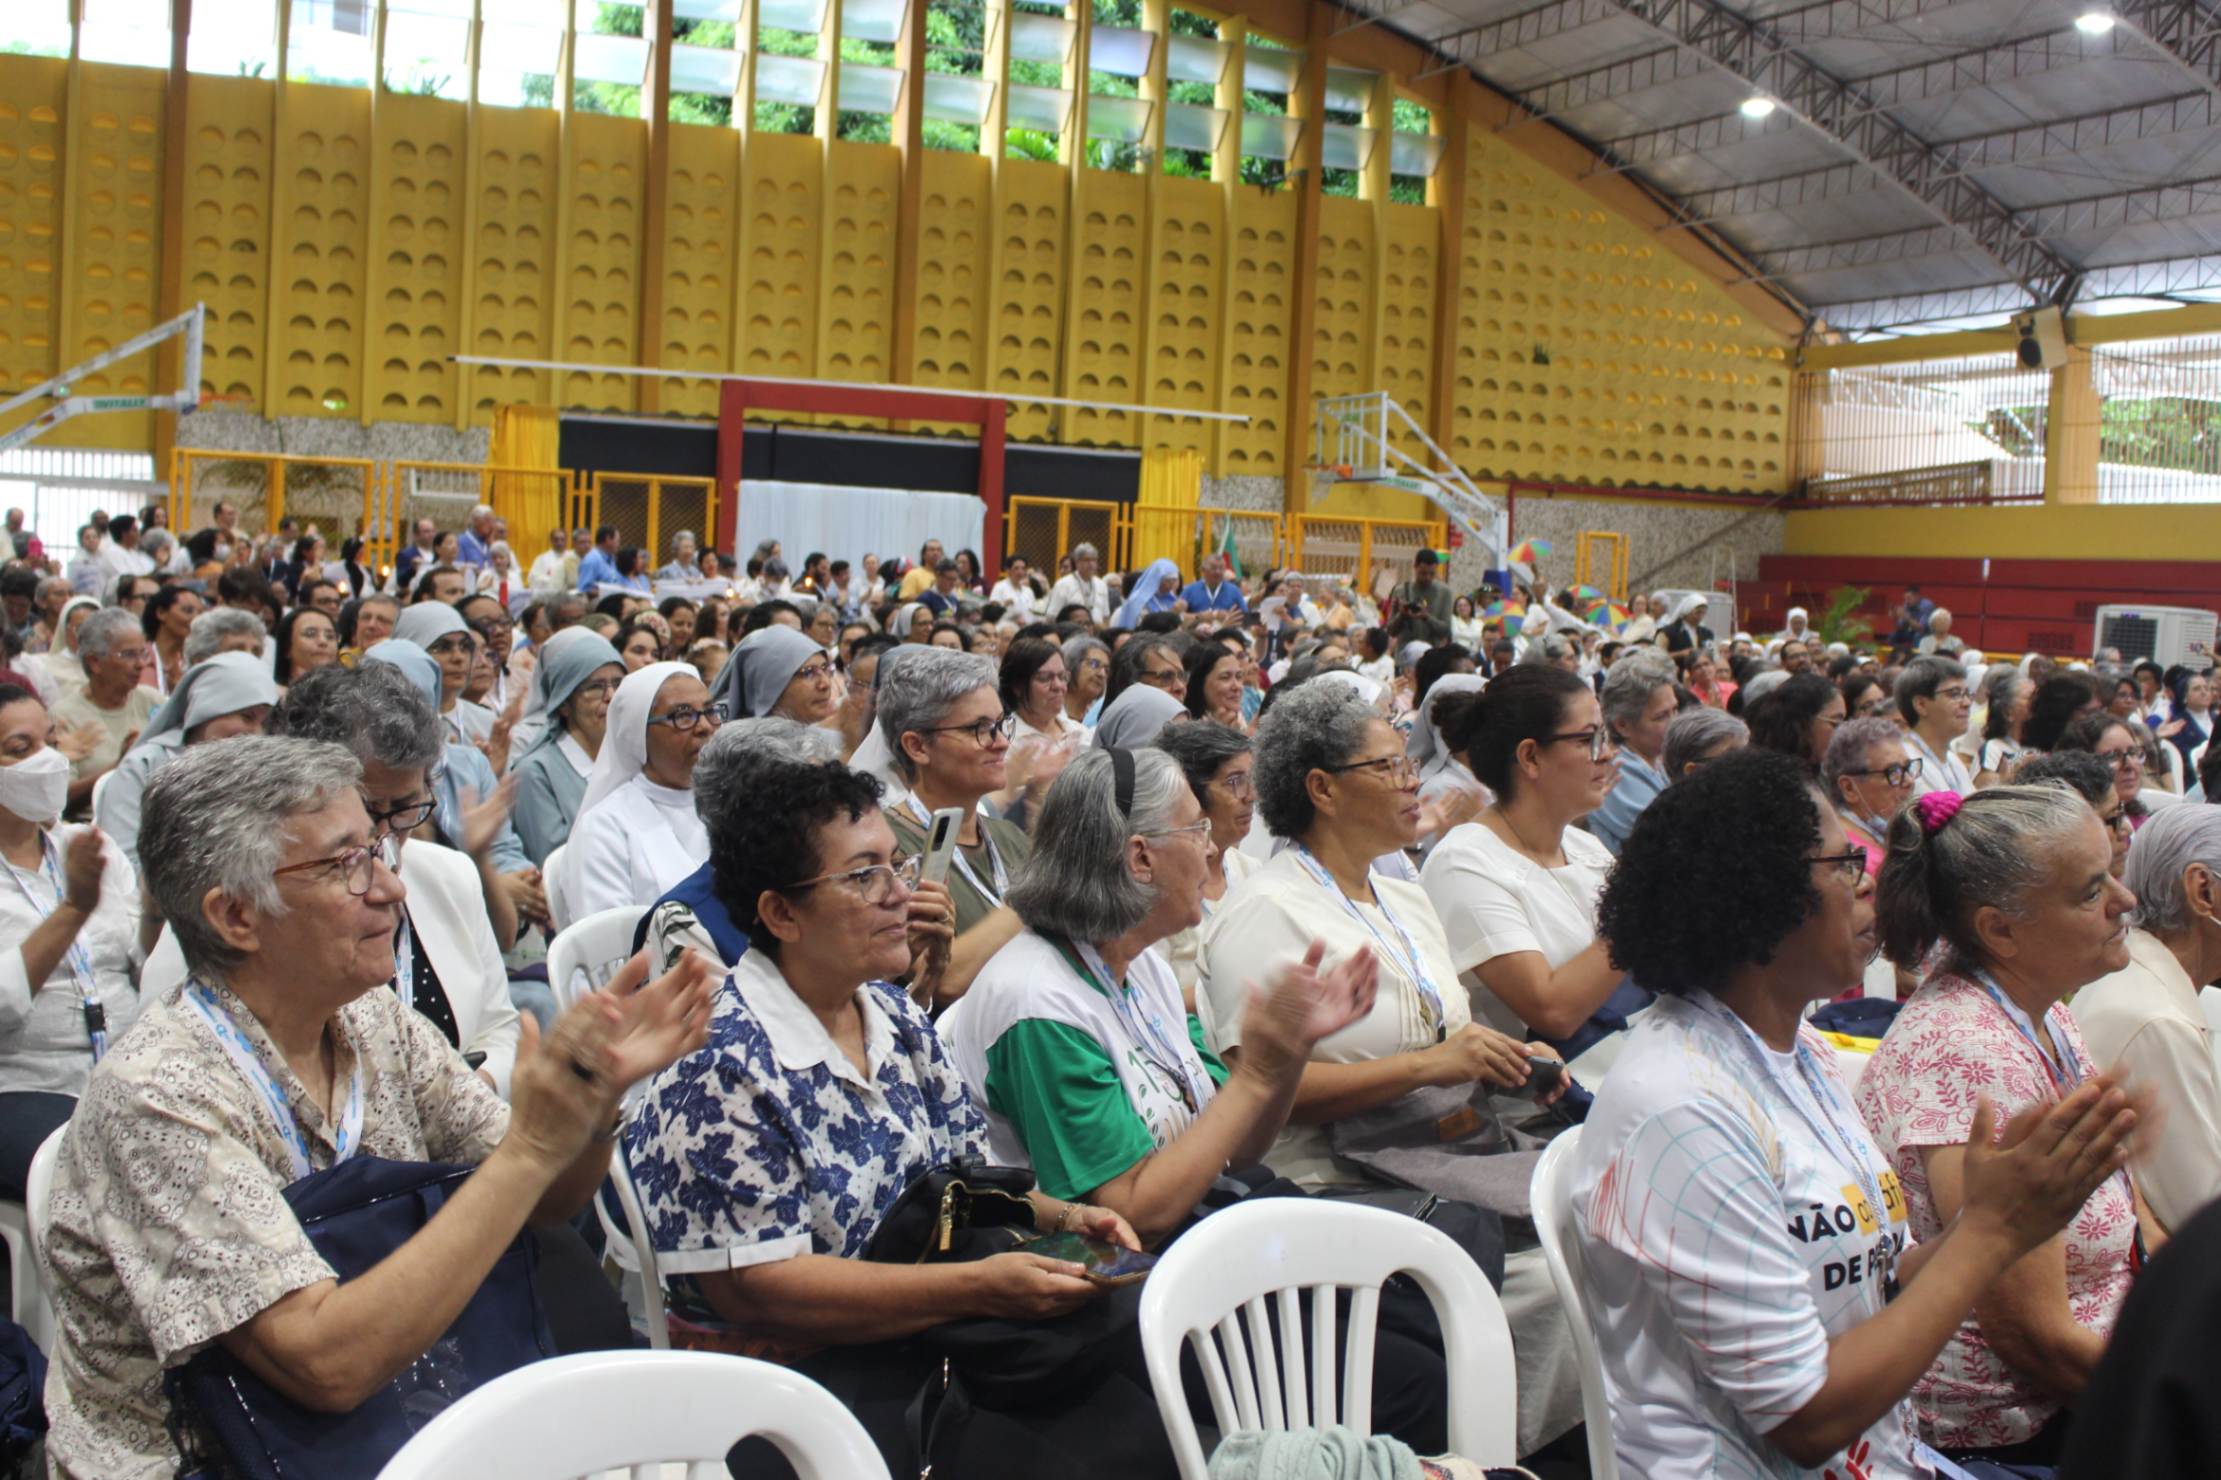 Religious from all over Brazil gathered in Fortaleza, Ceara, to celebrate the Congress of Religious of Brazil's 70th anniversary. (Courtesy of CRB)